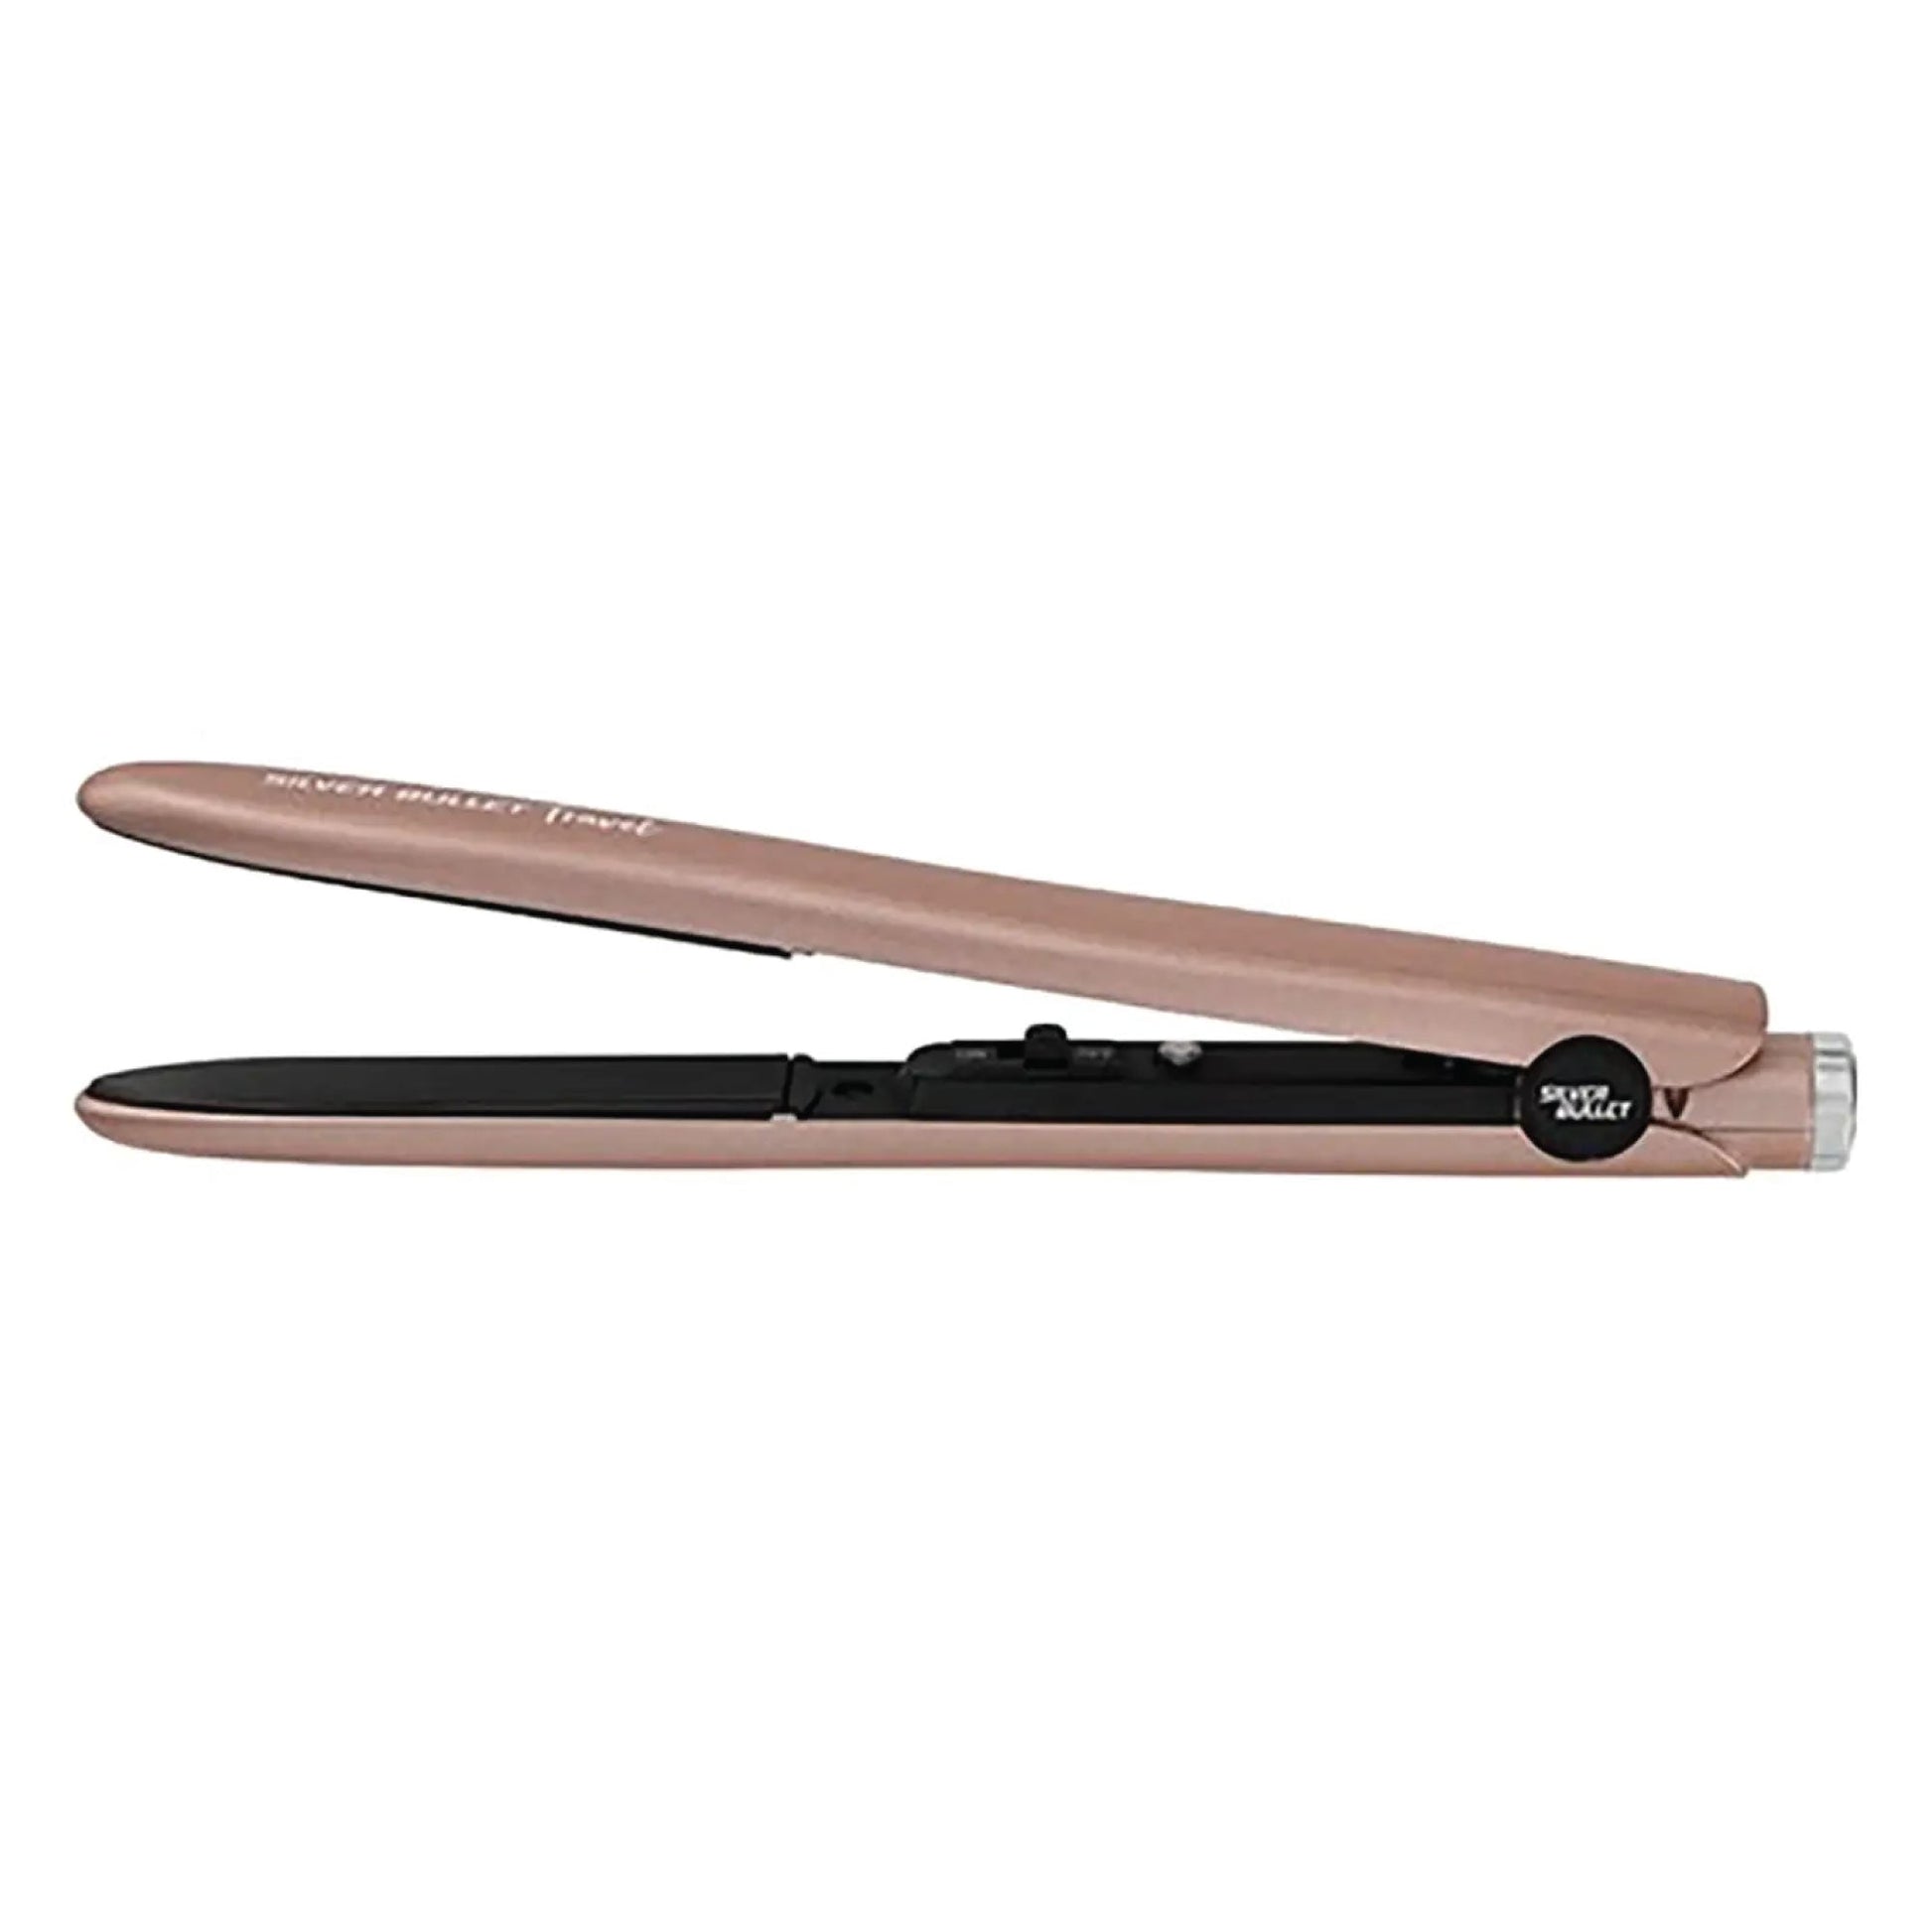 Silver Bullet Mini Hair Dryer and Straightener Iron Luxe Travel Set - Rose Gold